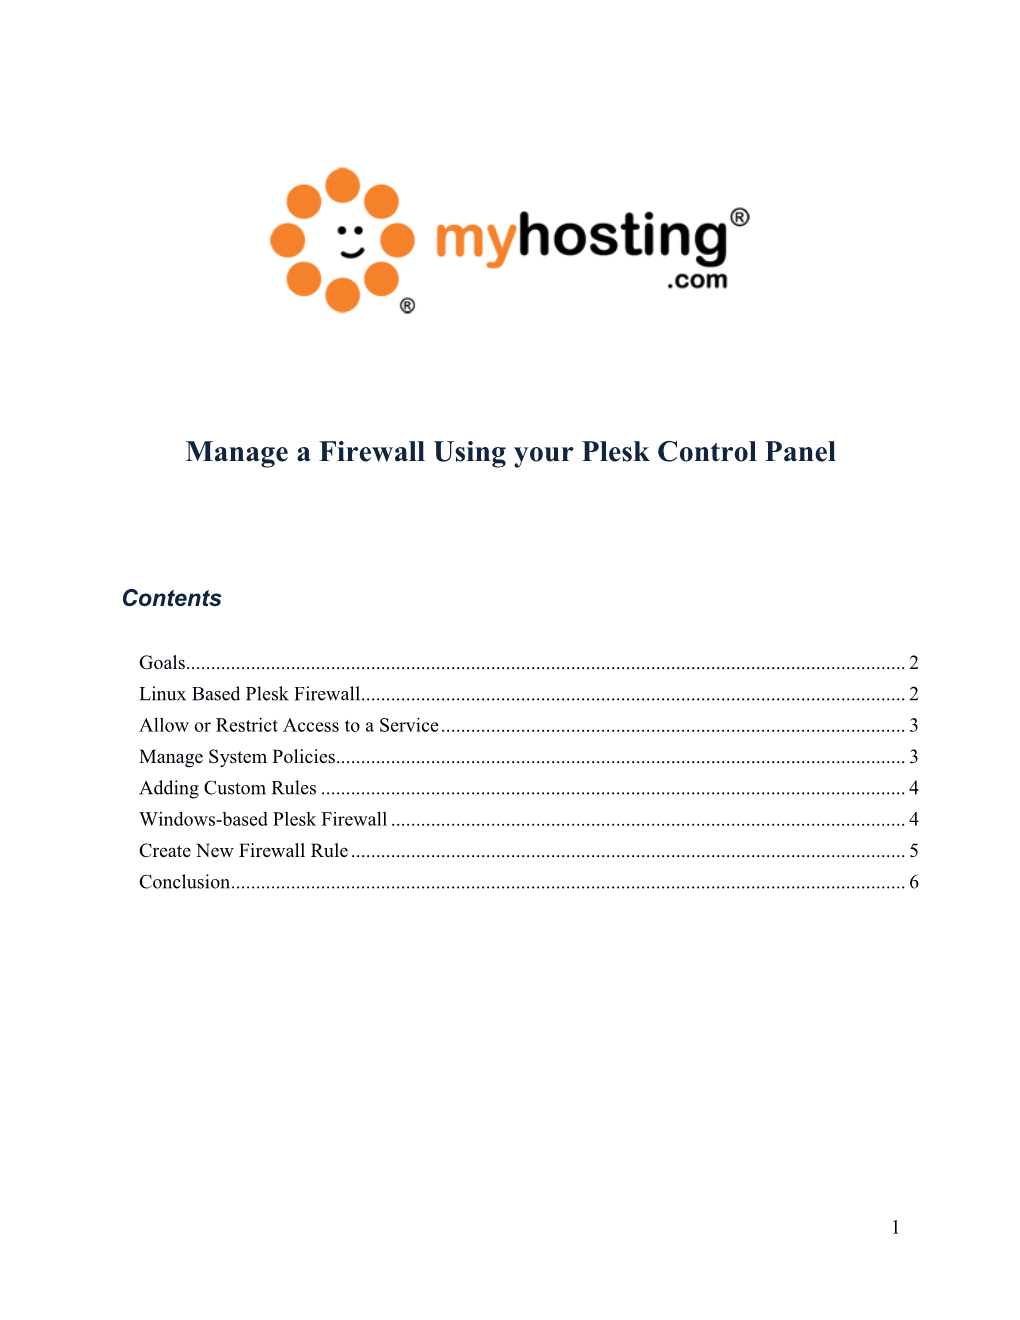 Manage a Firewall Using Your Plesk Control Panel